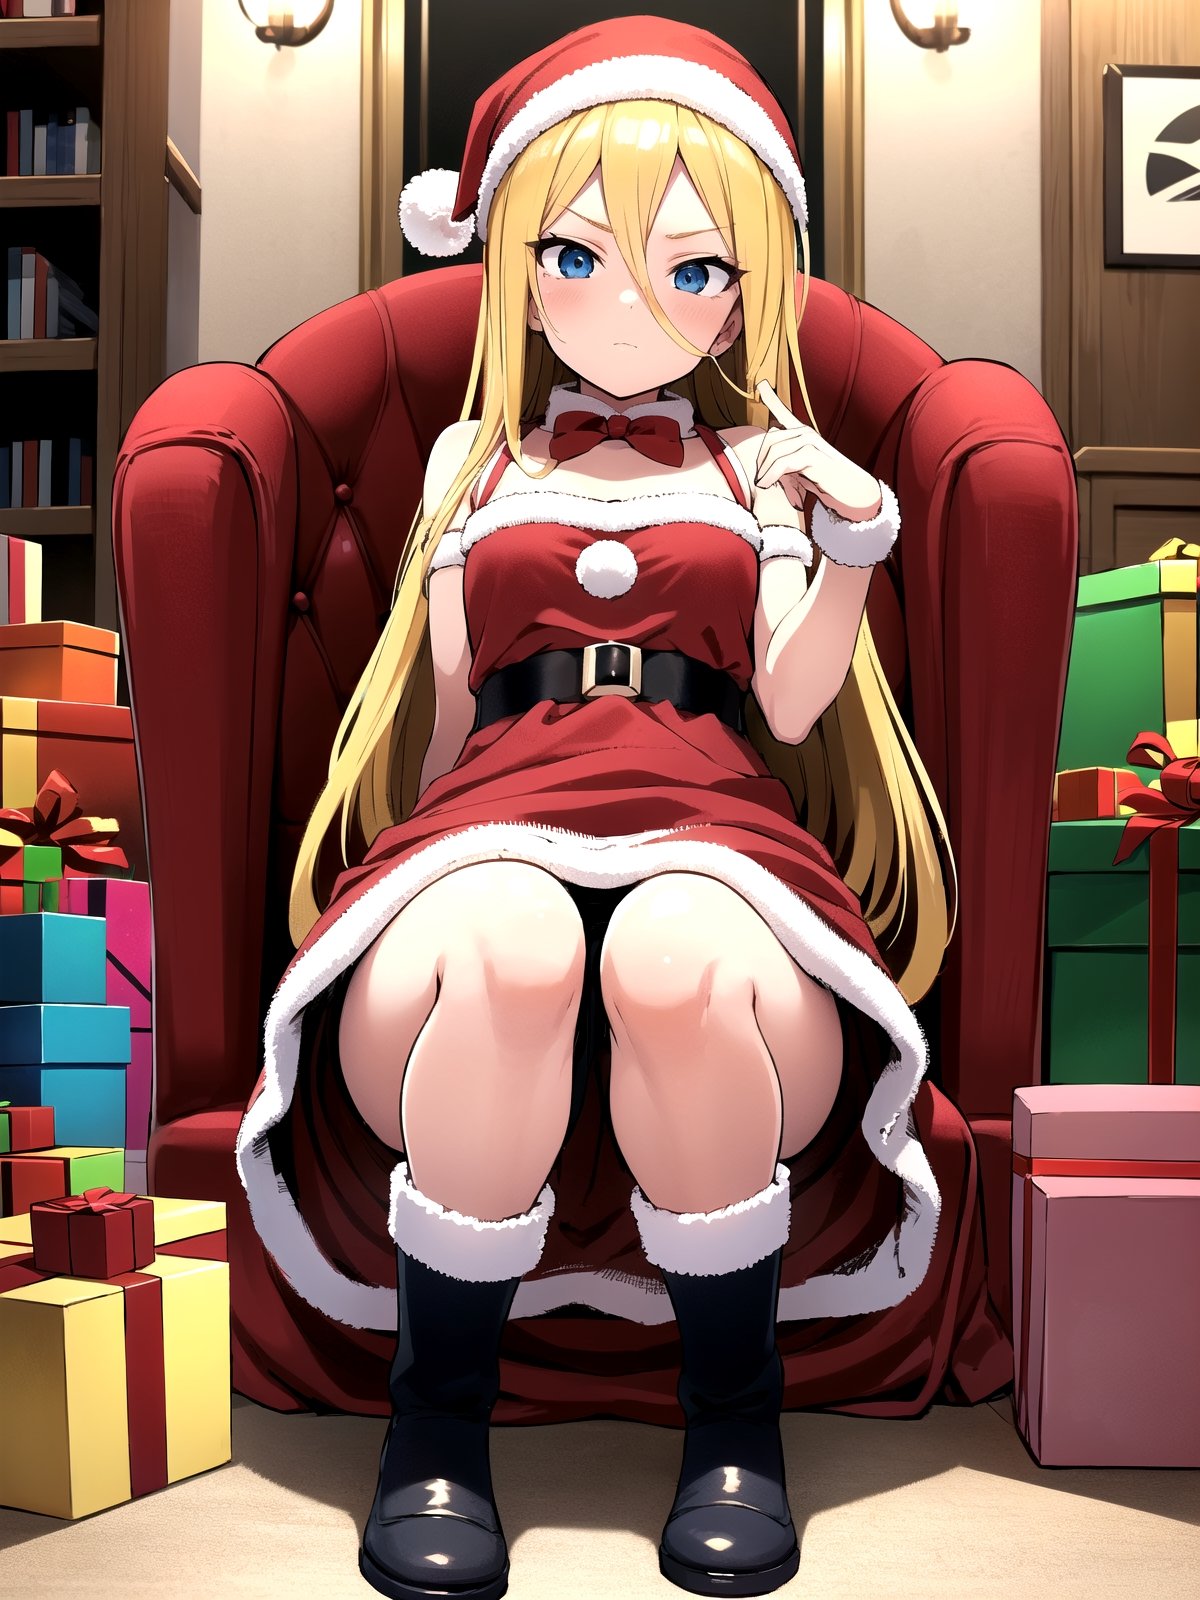 //Quality,
(masterpiece), (best quality), 8k illustration,
//Character,
overlordentoma, 1girl, solo, gift
//Fashion,
santa_costume,
//Background,
indoors, christmas, 
//Others,
evileye_overlord